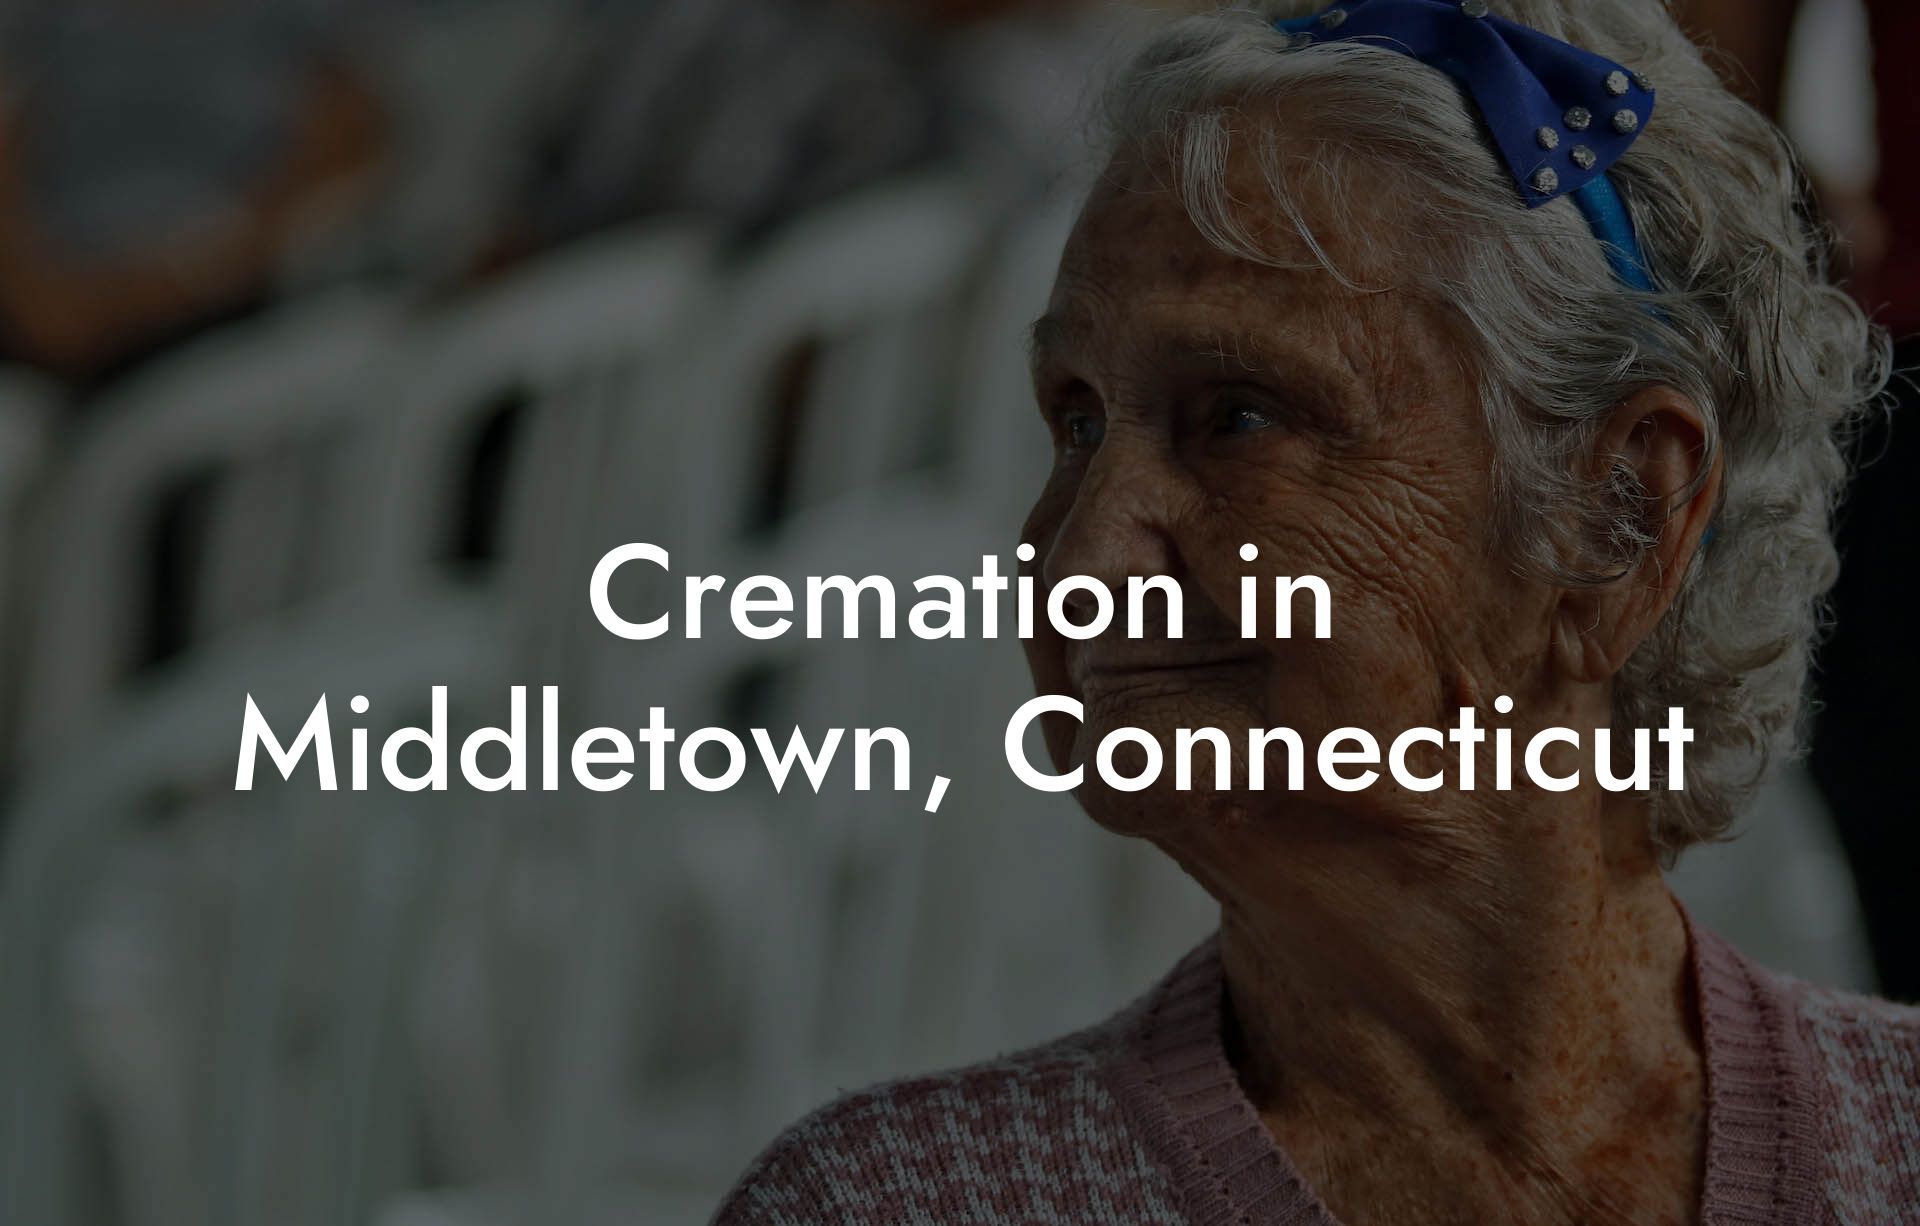 Cremation in Middletown, Connecticut